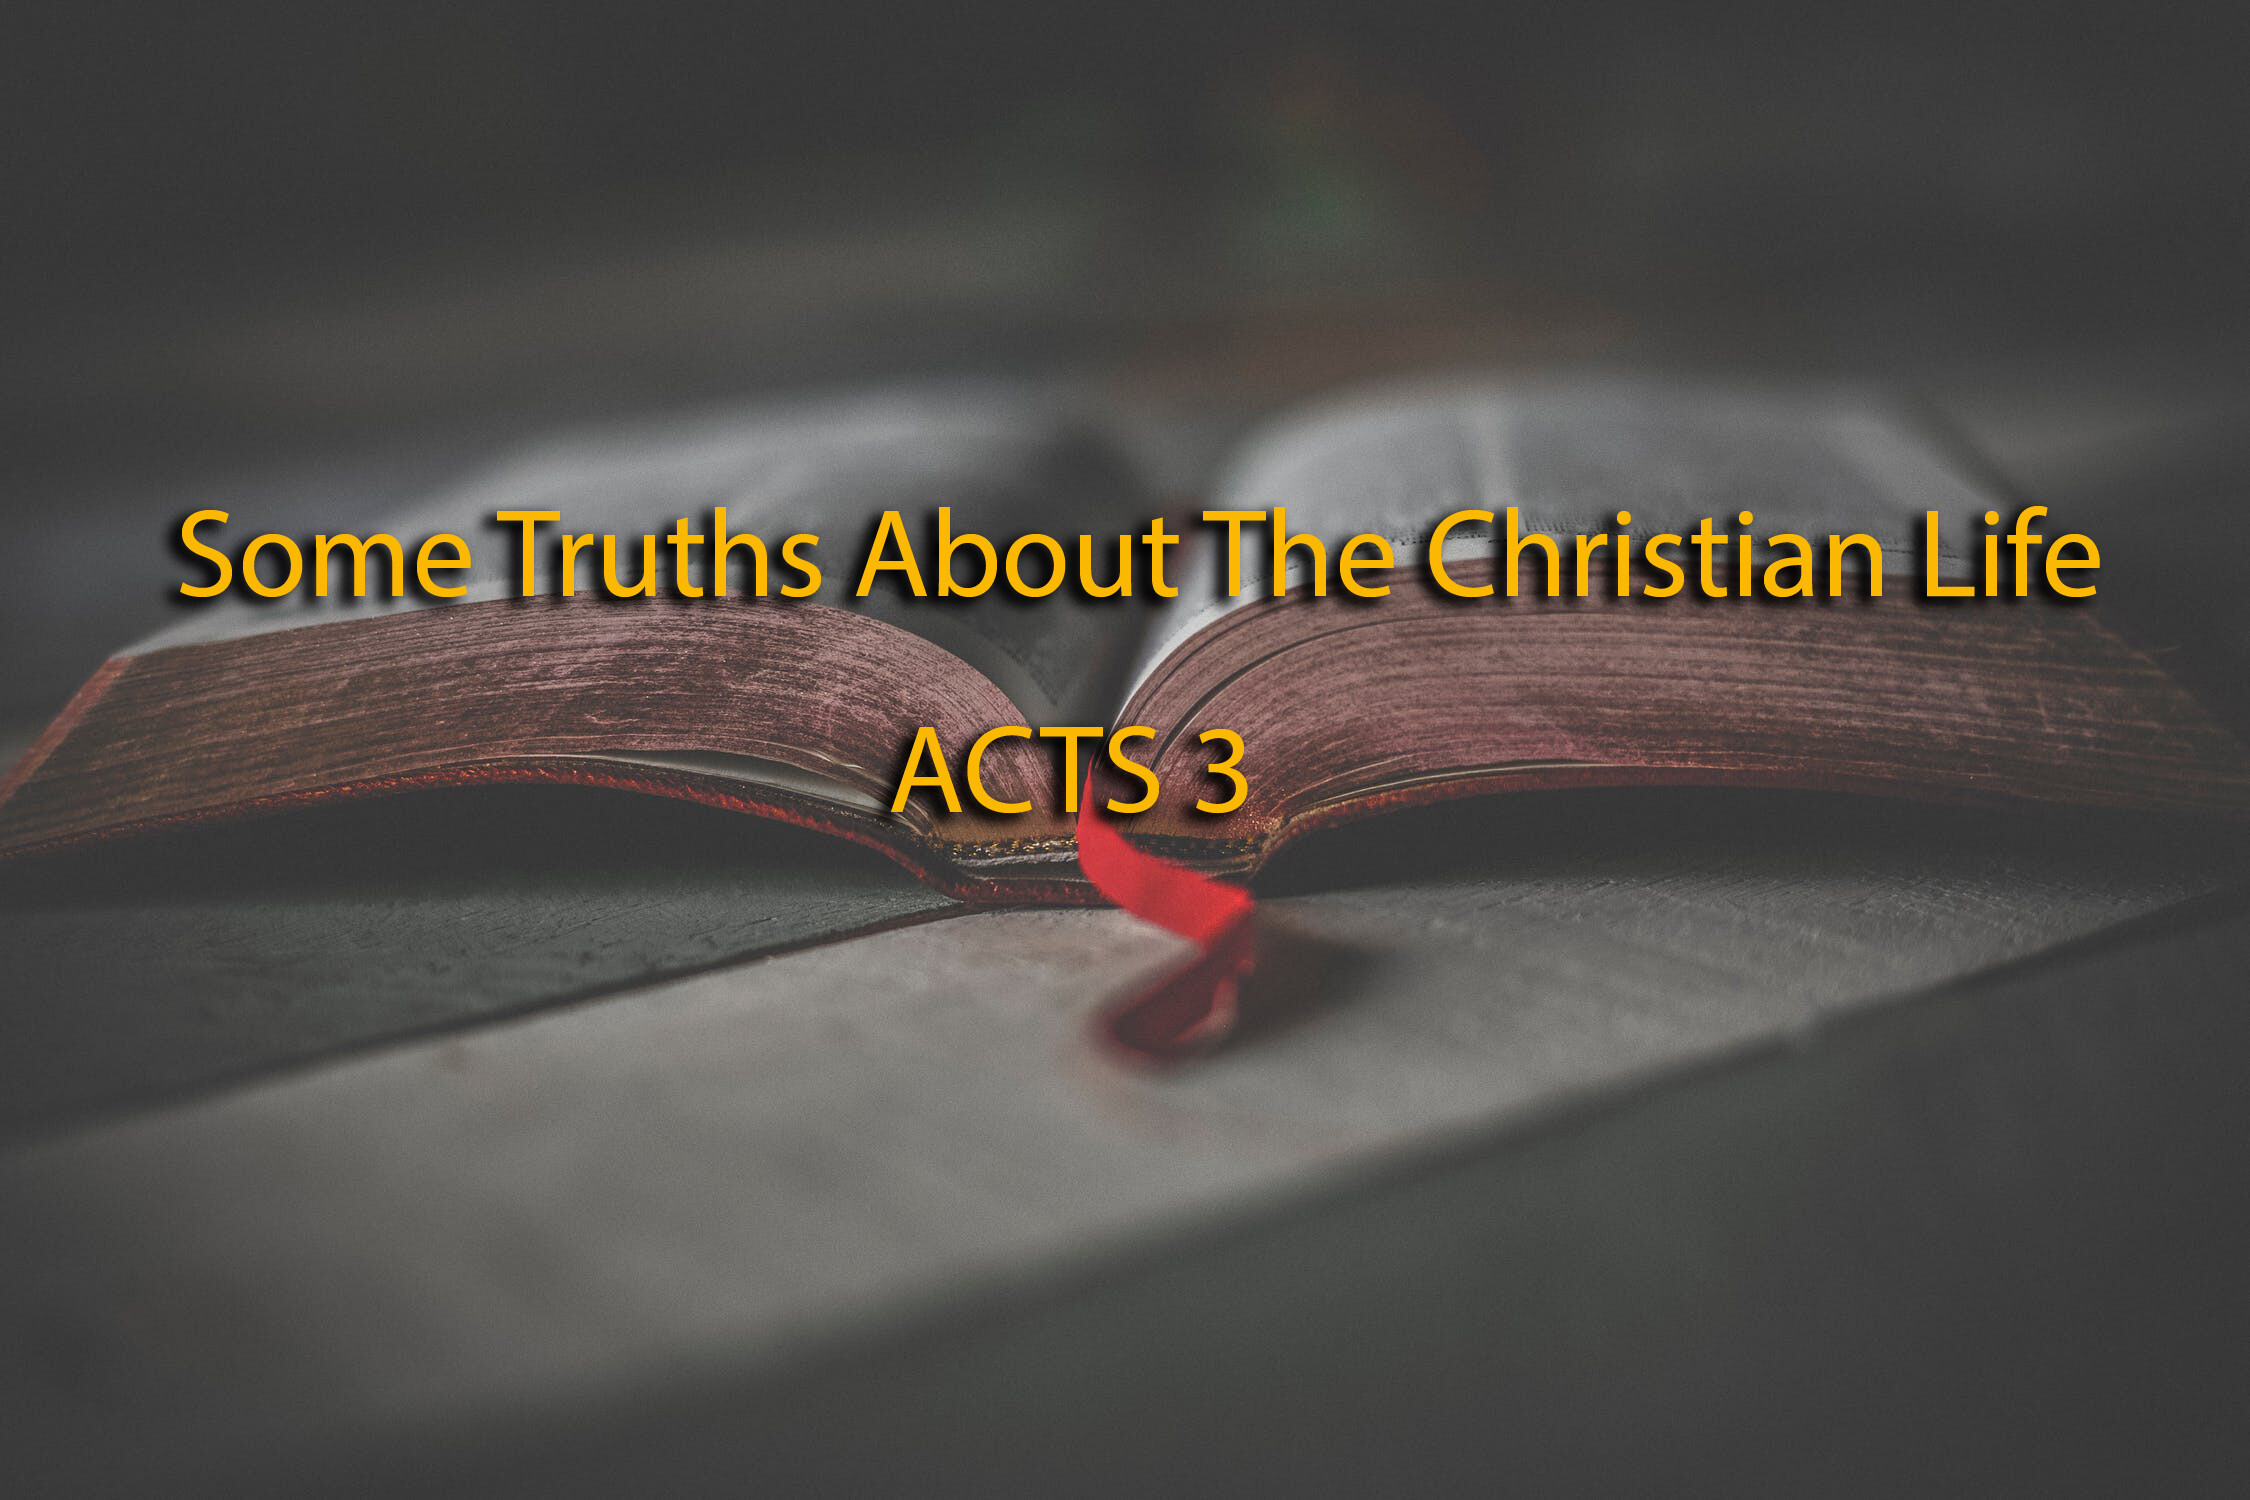 Some truths about the Christian life